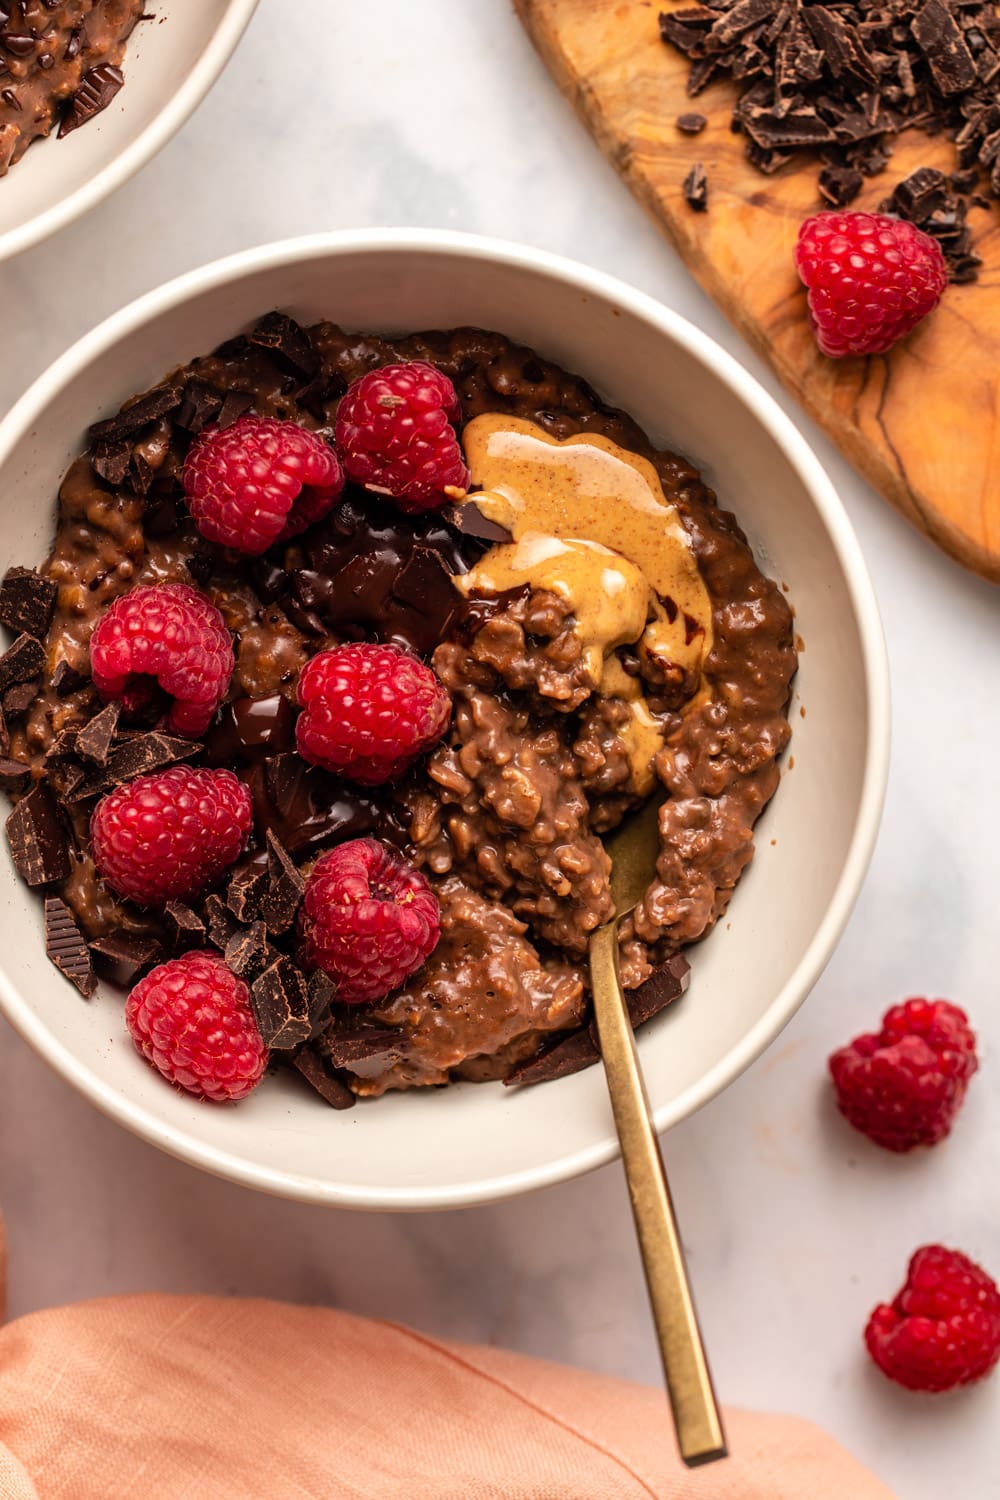 Chocolate oatmeal in bowl with more chocolate, raspberries, and nut butter